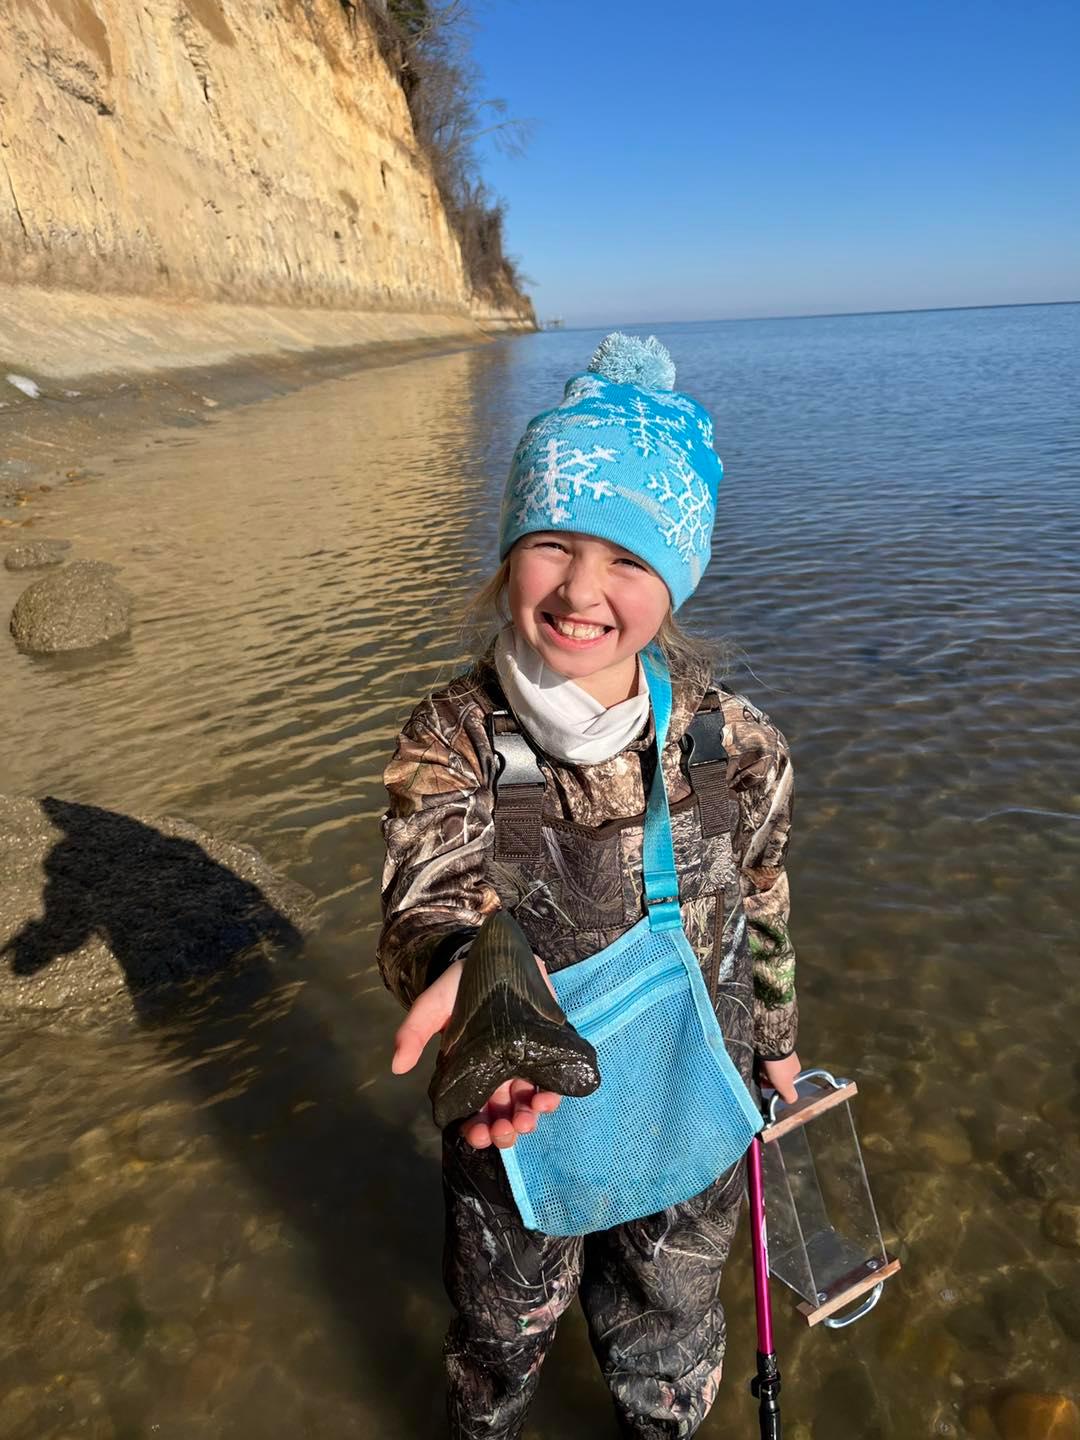 Molly upon finding her megalodon tooth. (Courtesy of <a href="https://www.instagram.com/fossilgirls_md/">@fossilgirls_md</a> and <a href="https://www.instagram.com/fossilgirls_md/">www.thefossilgirls.com</a>)